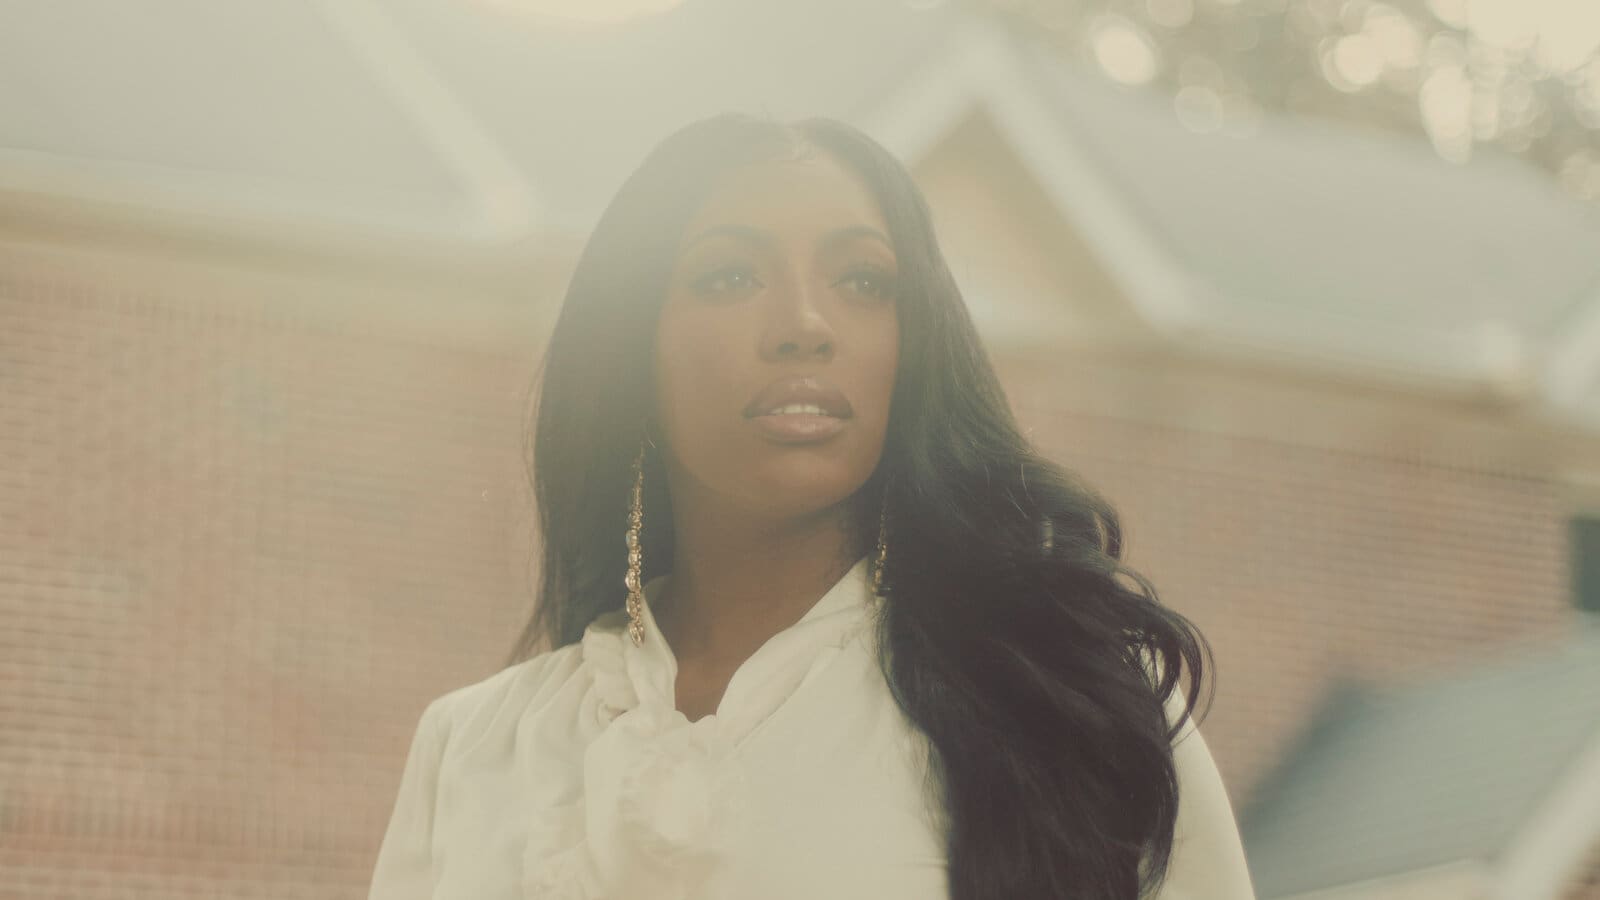 Porsha Williams' Latest Video About Cooking Has A Catch That Makes Some Fans Cry